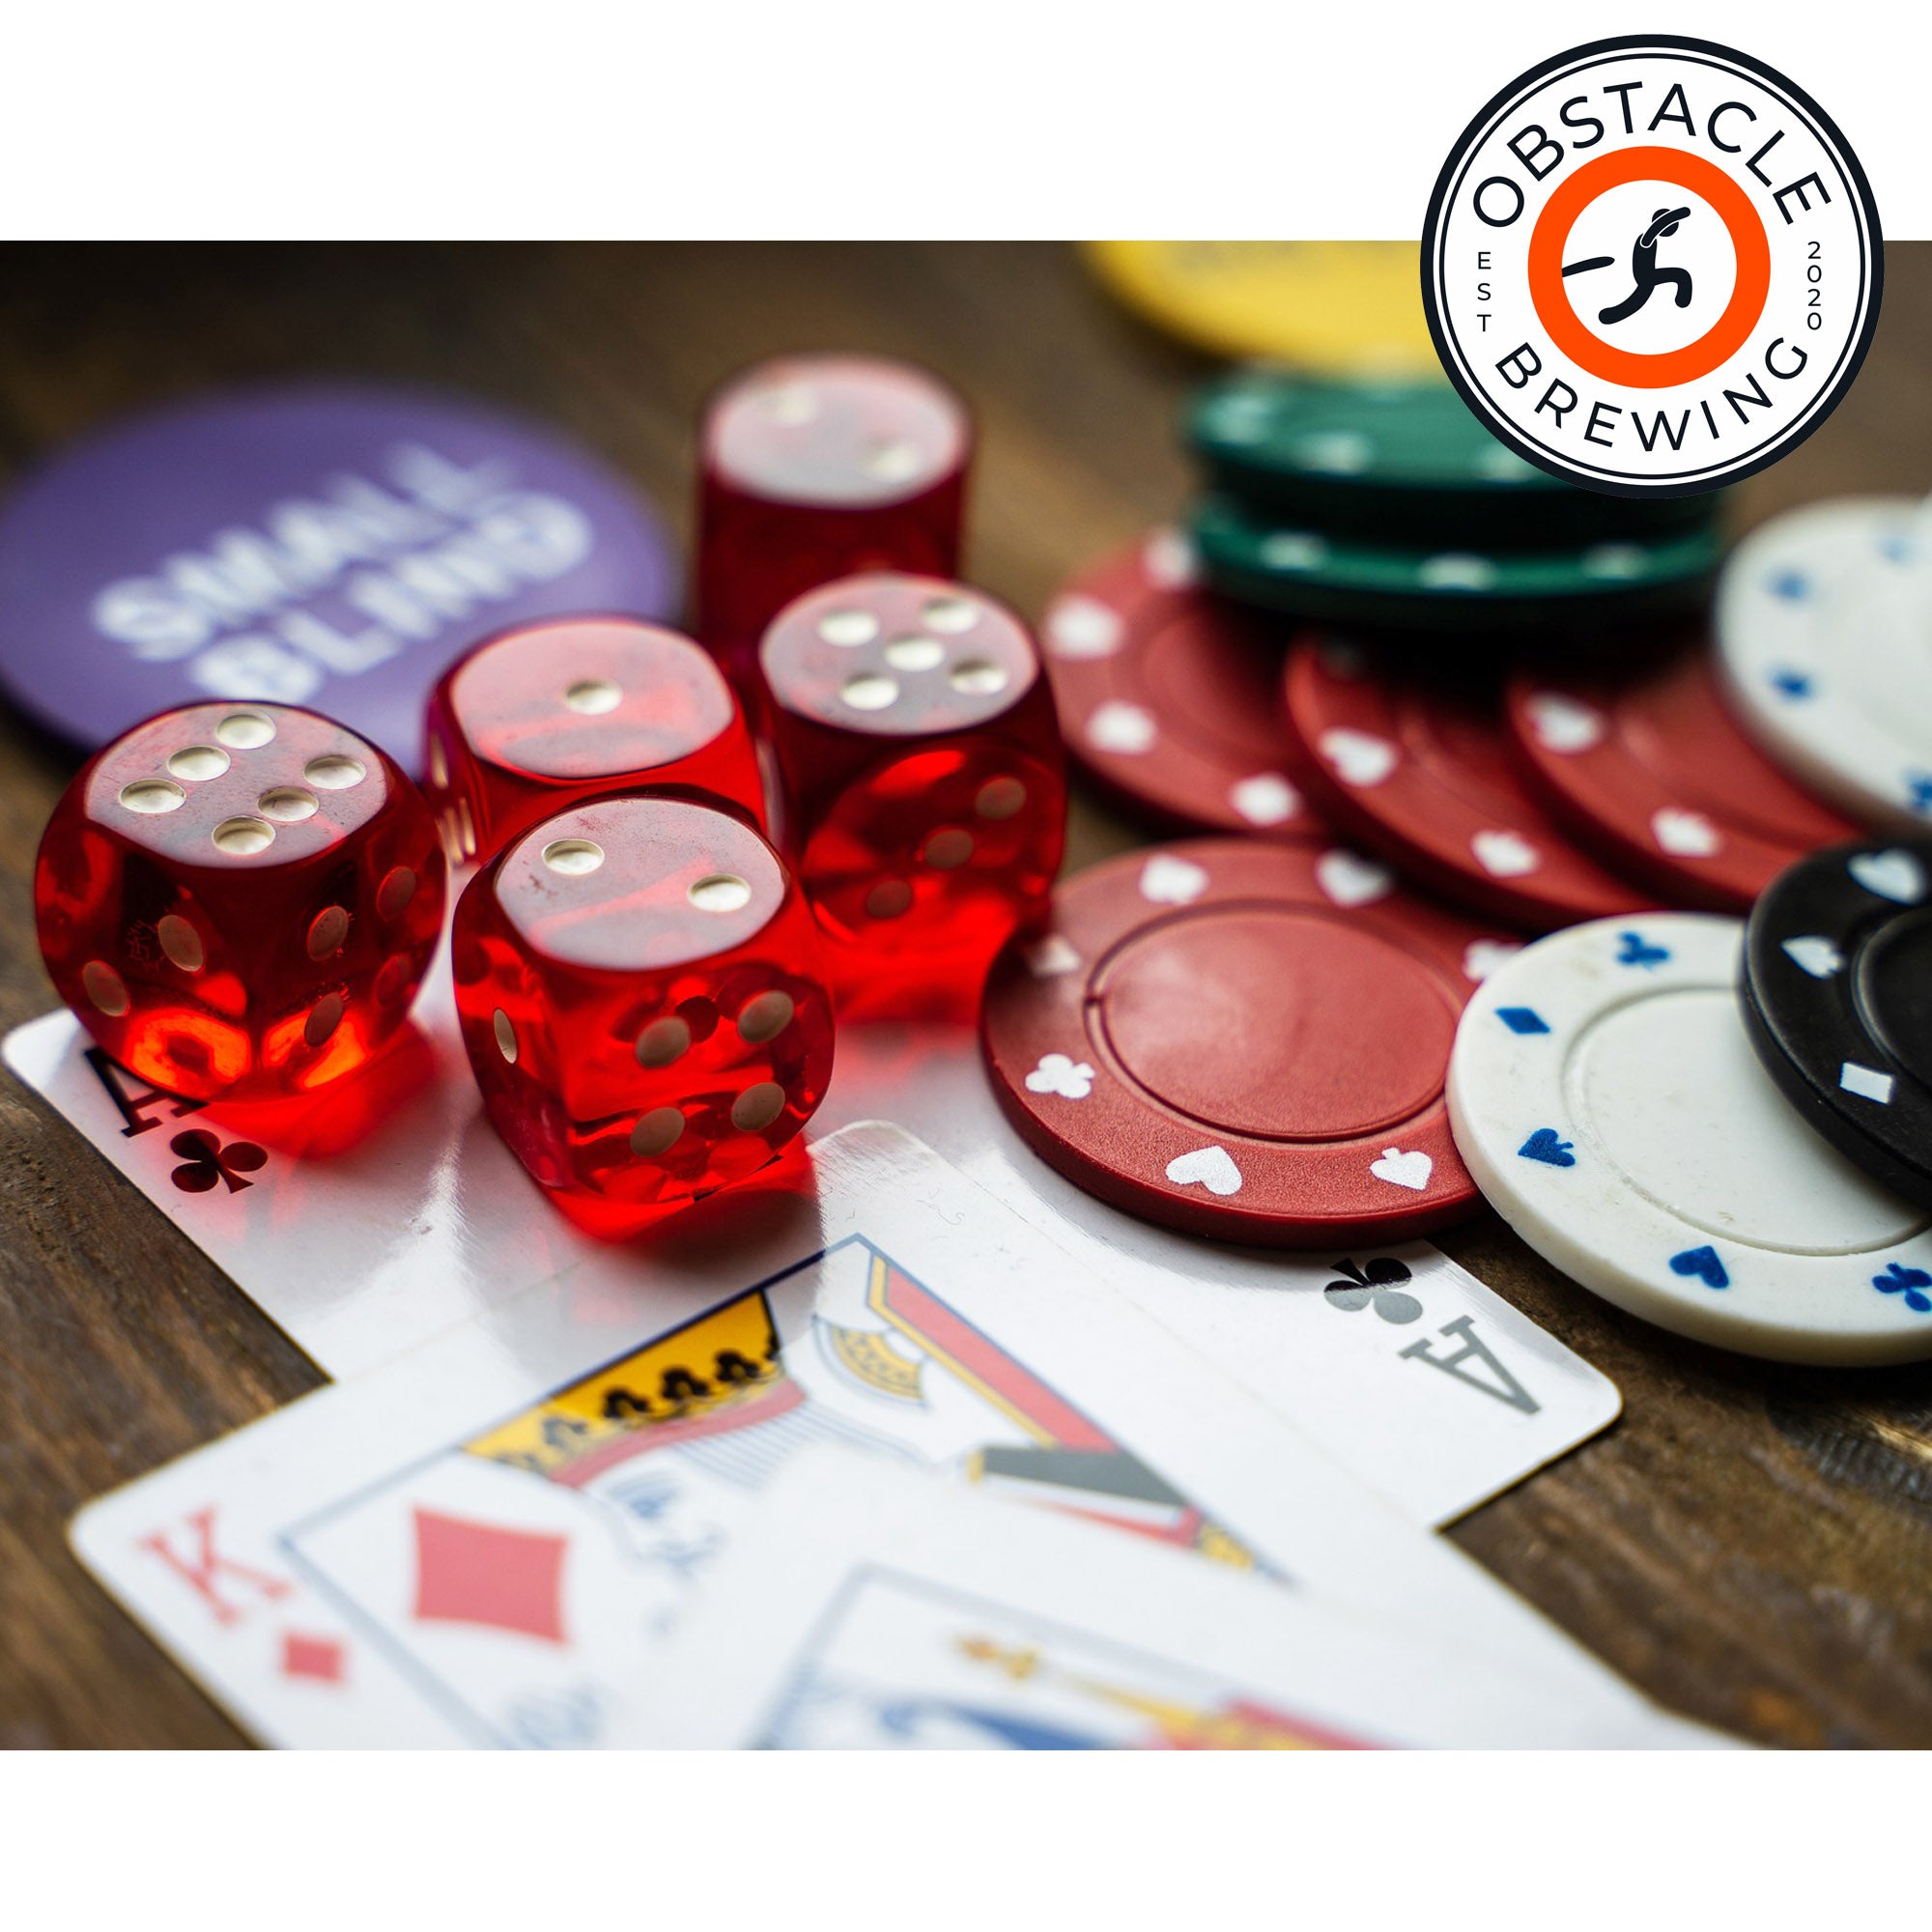 The Art of Poker at Obstacle Brewing - Wed 6.5.24 @ 6:00P